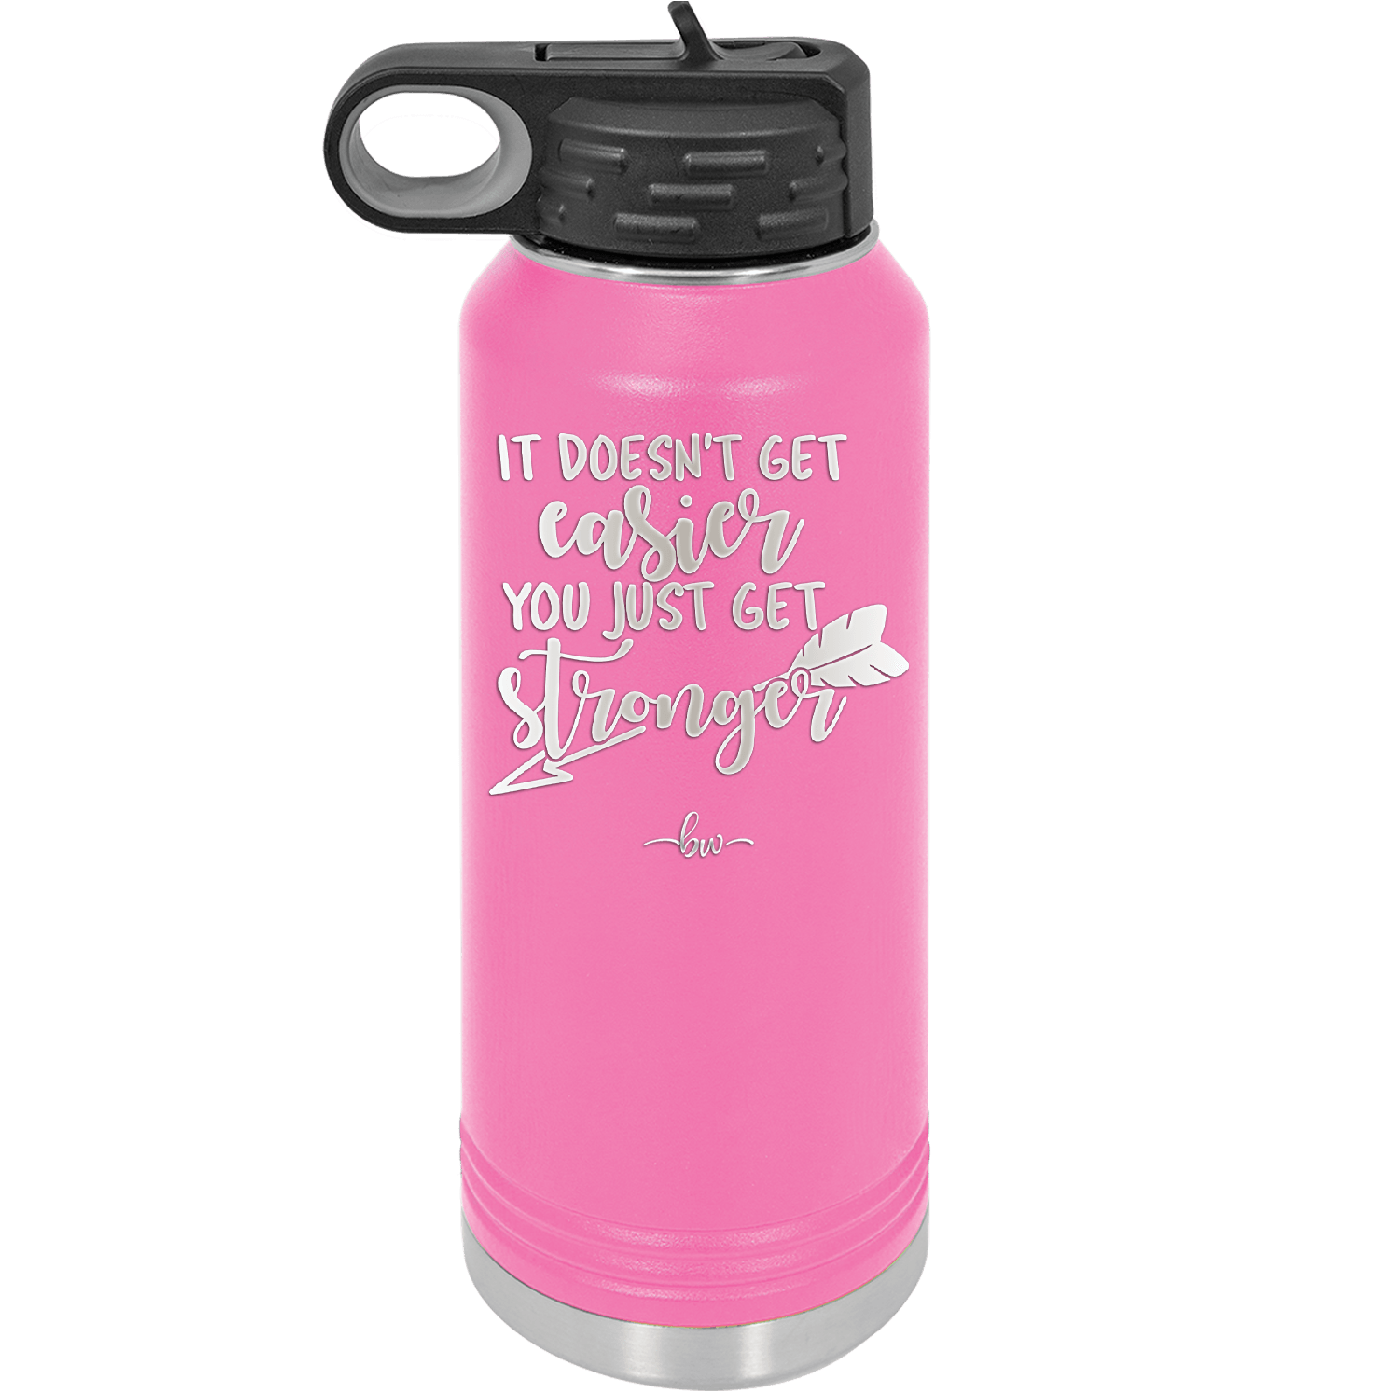 It Doesn't Get Easier You Just Get Stronger 1 - Laser Engraved Stainless Steel Drinkware - 1641 -